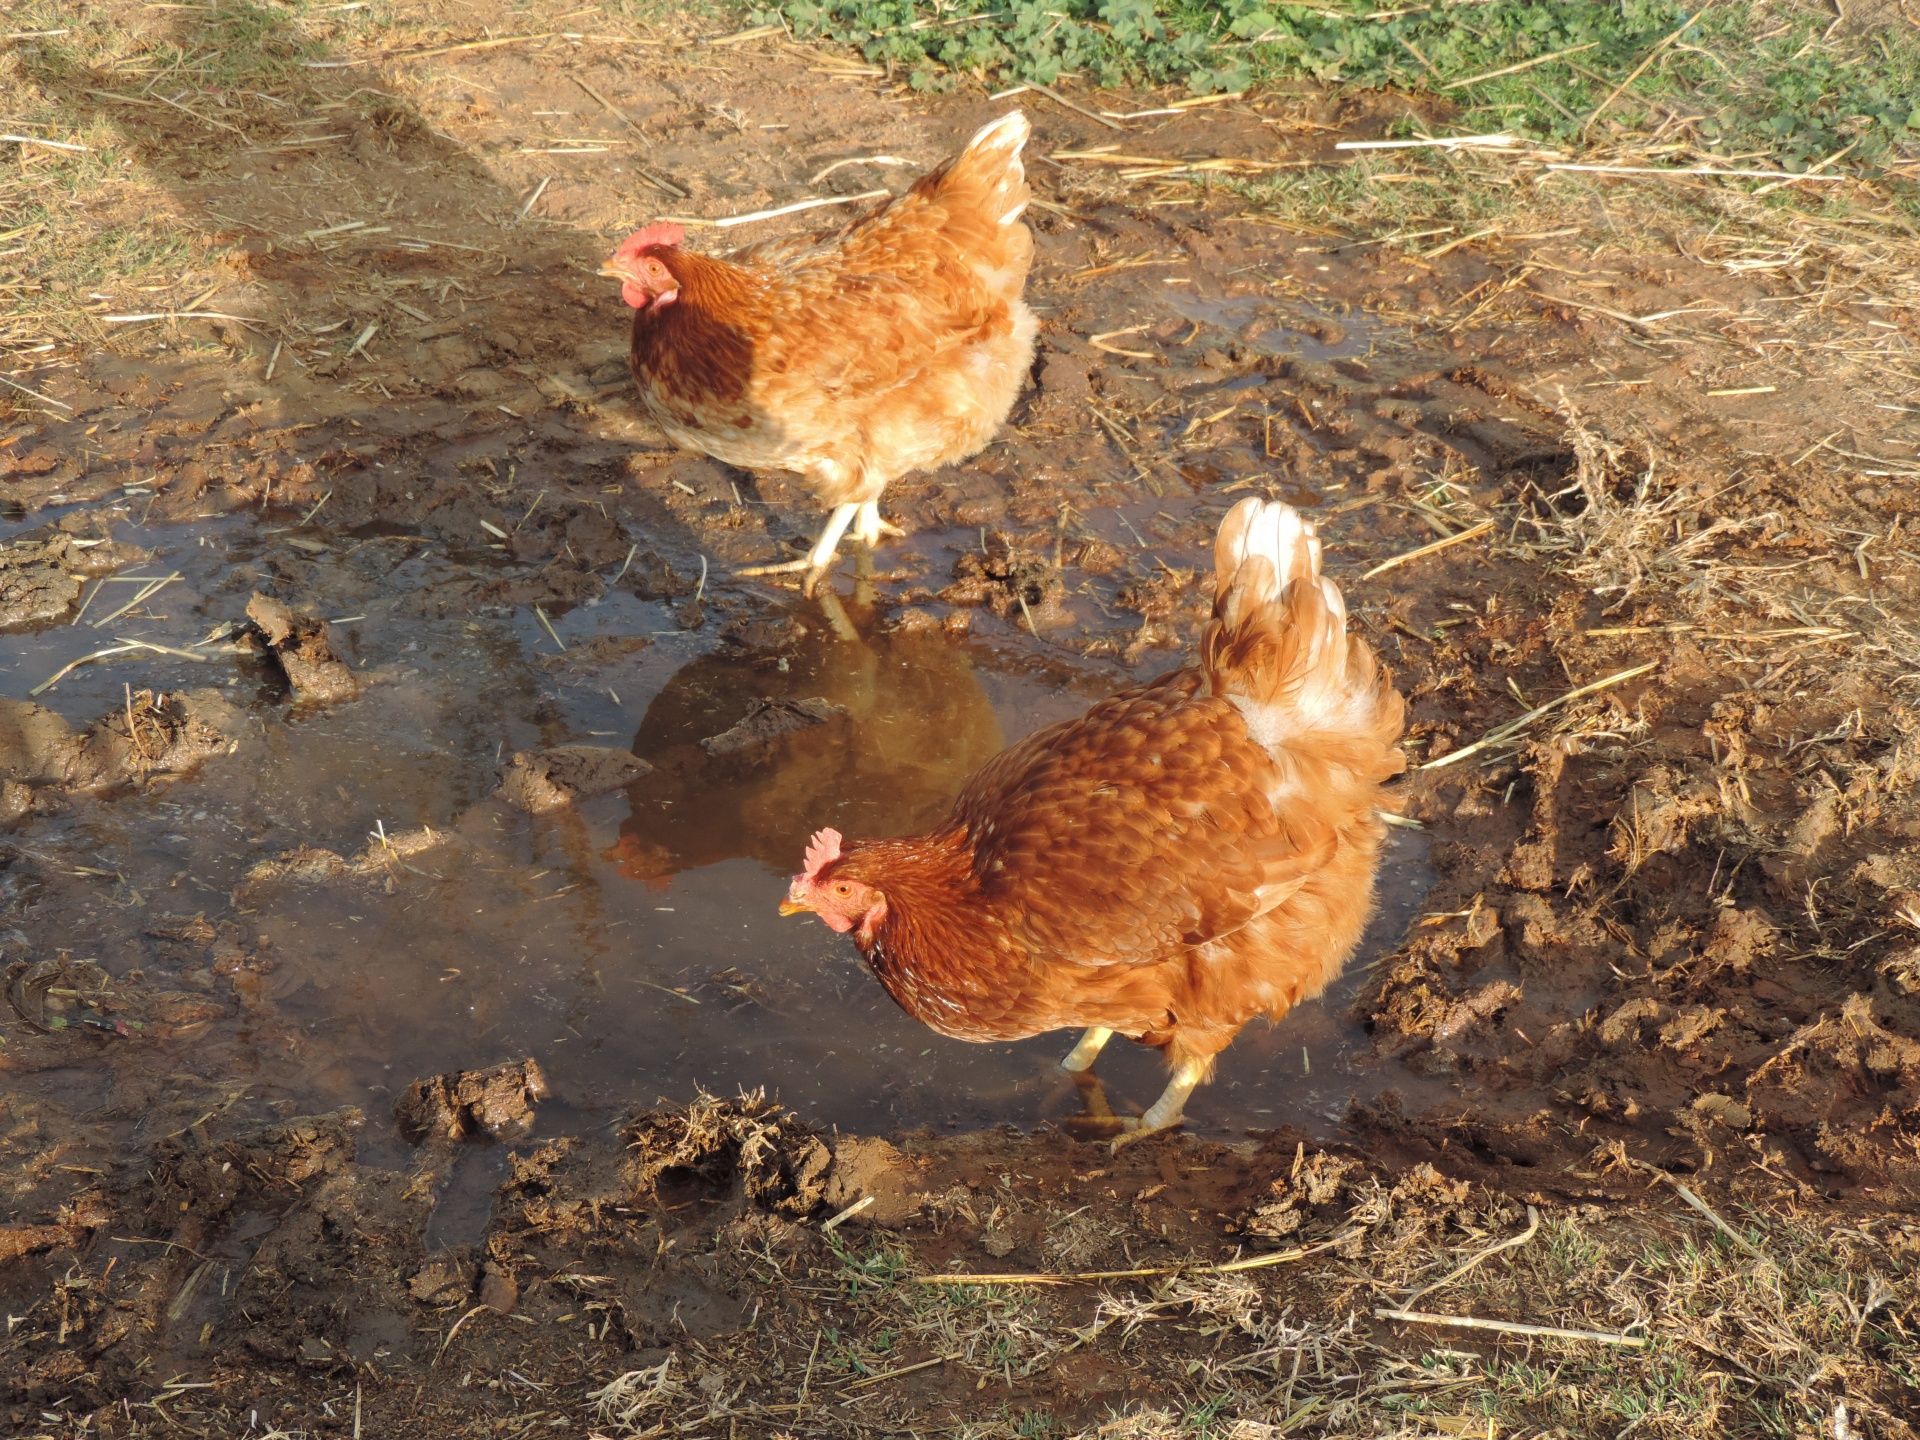 A couple of chickens playing in the mud